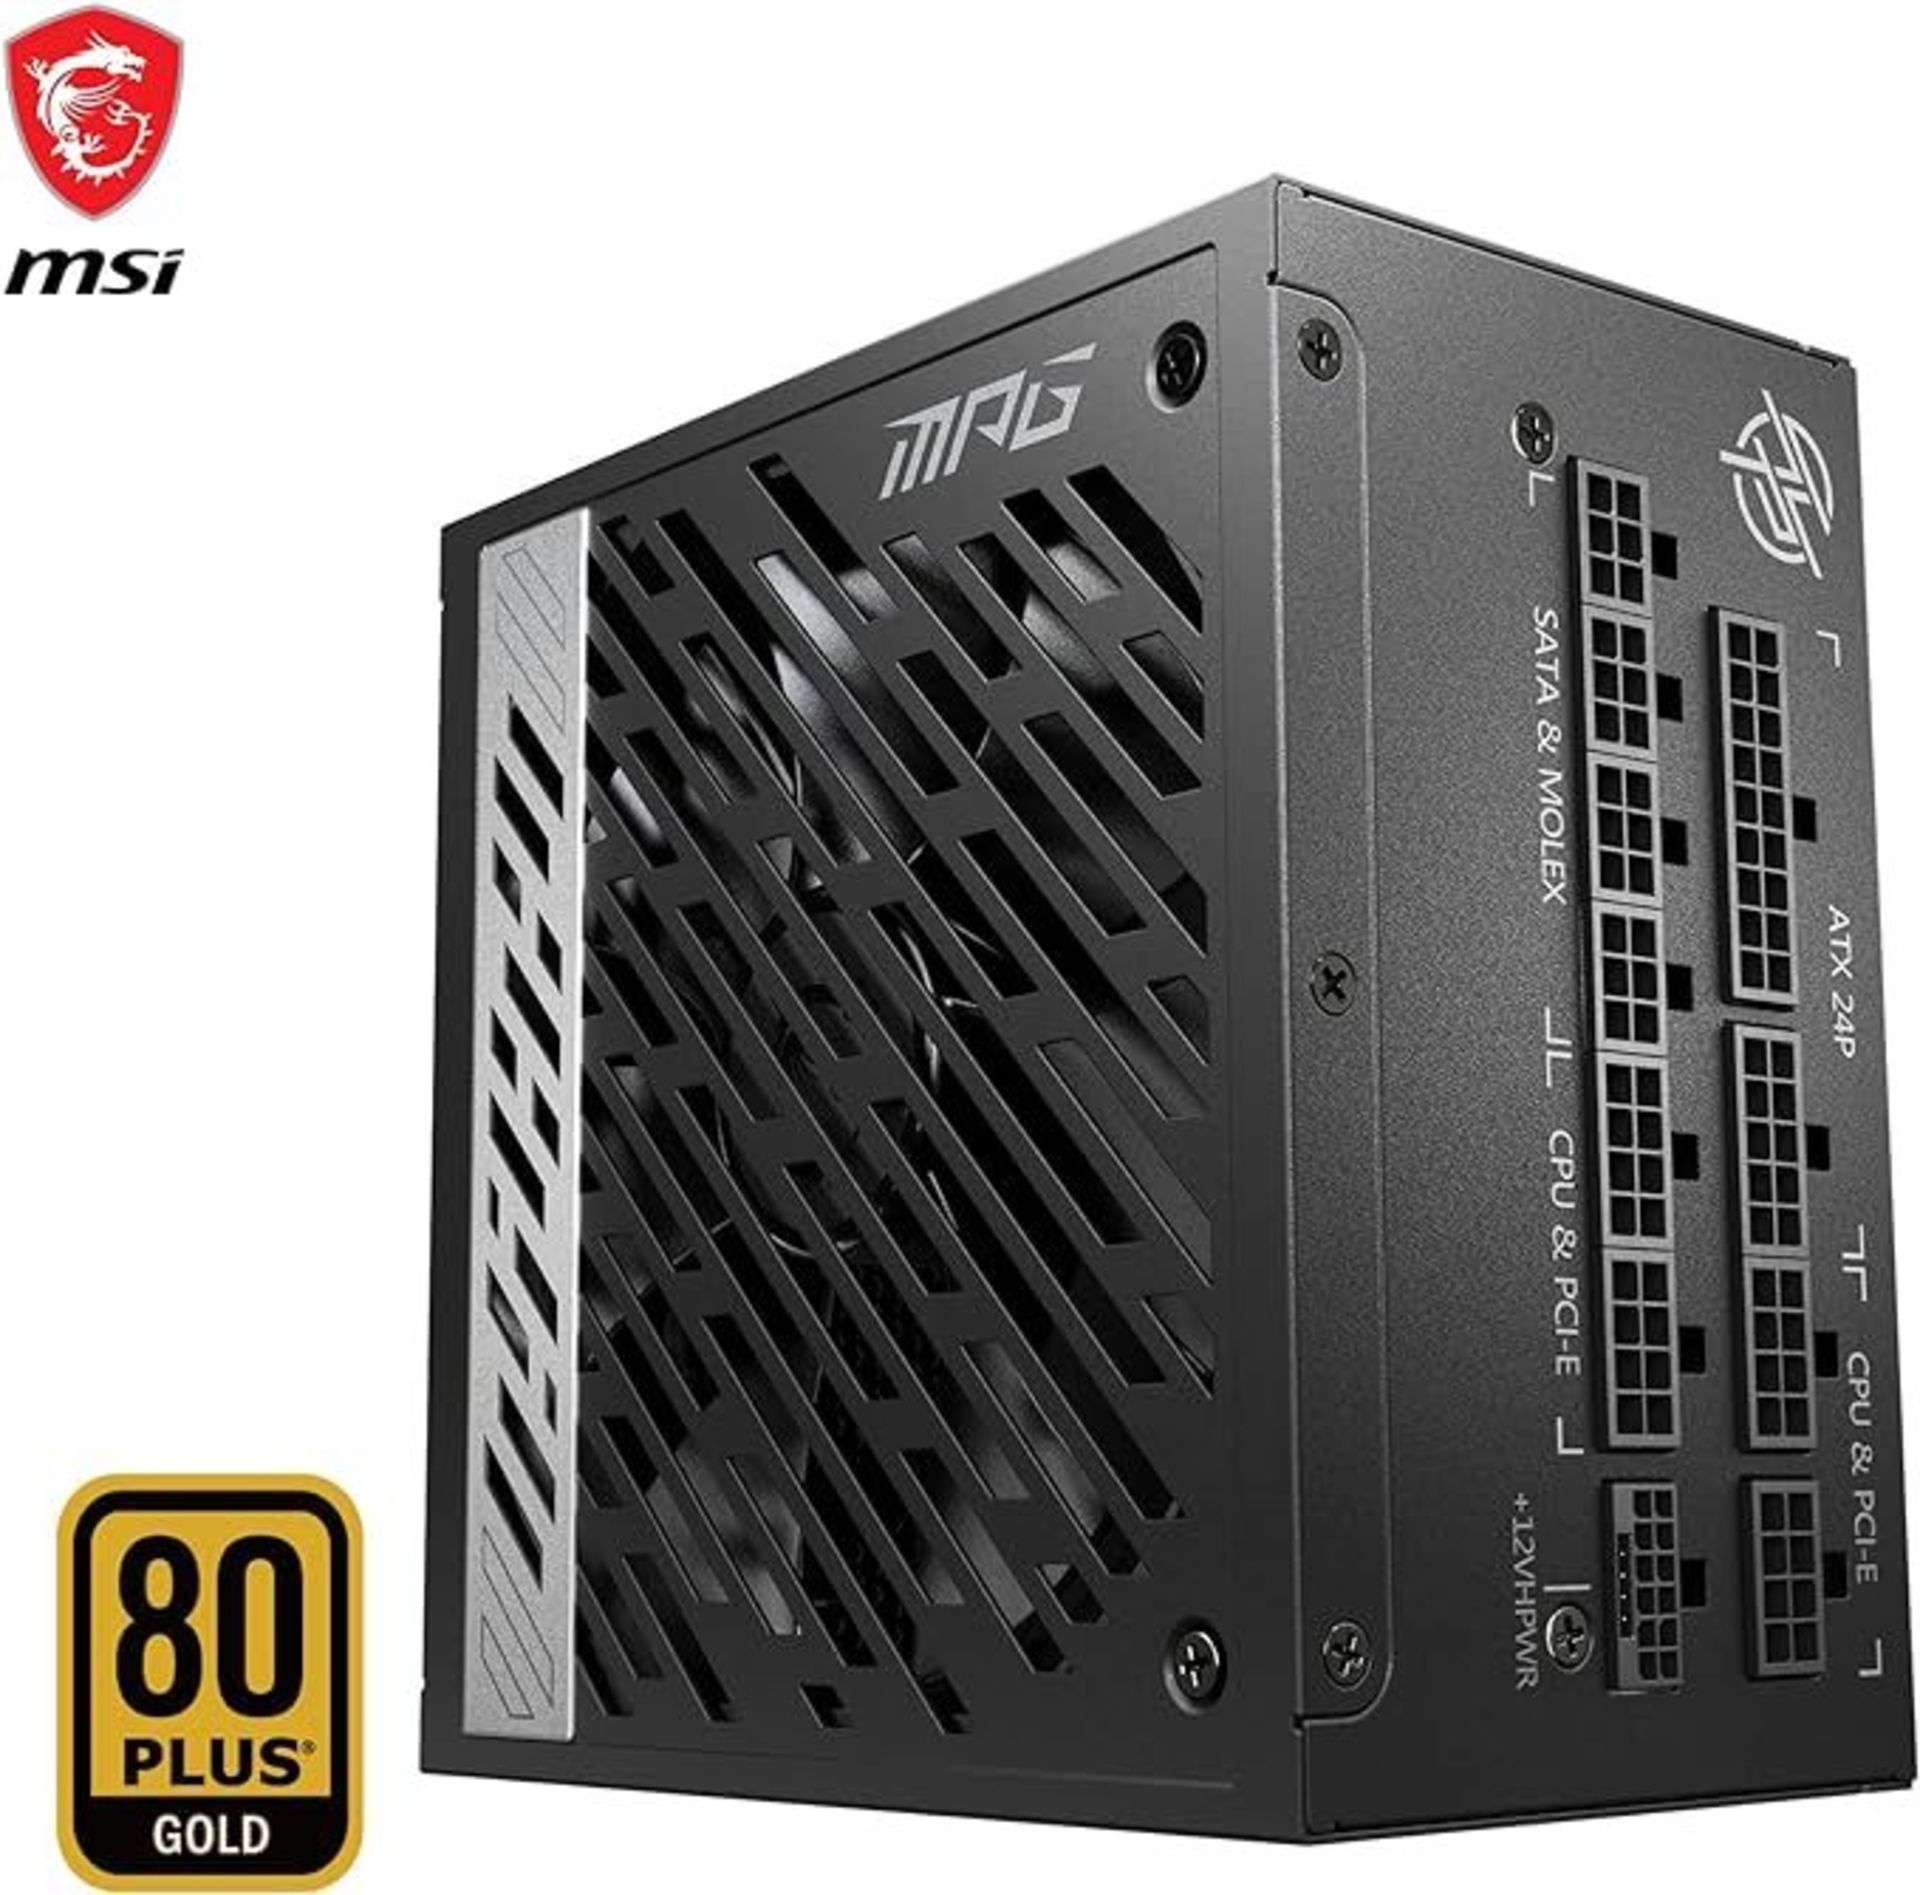 MSI MPG A1000G PCIE5 Power Supply Unit, UK Plug - 1000W, 80 Plus Gold Certified, Fully Modular ATX - Image 2 of 2